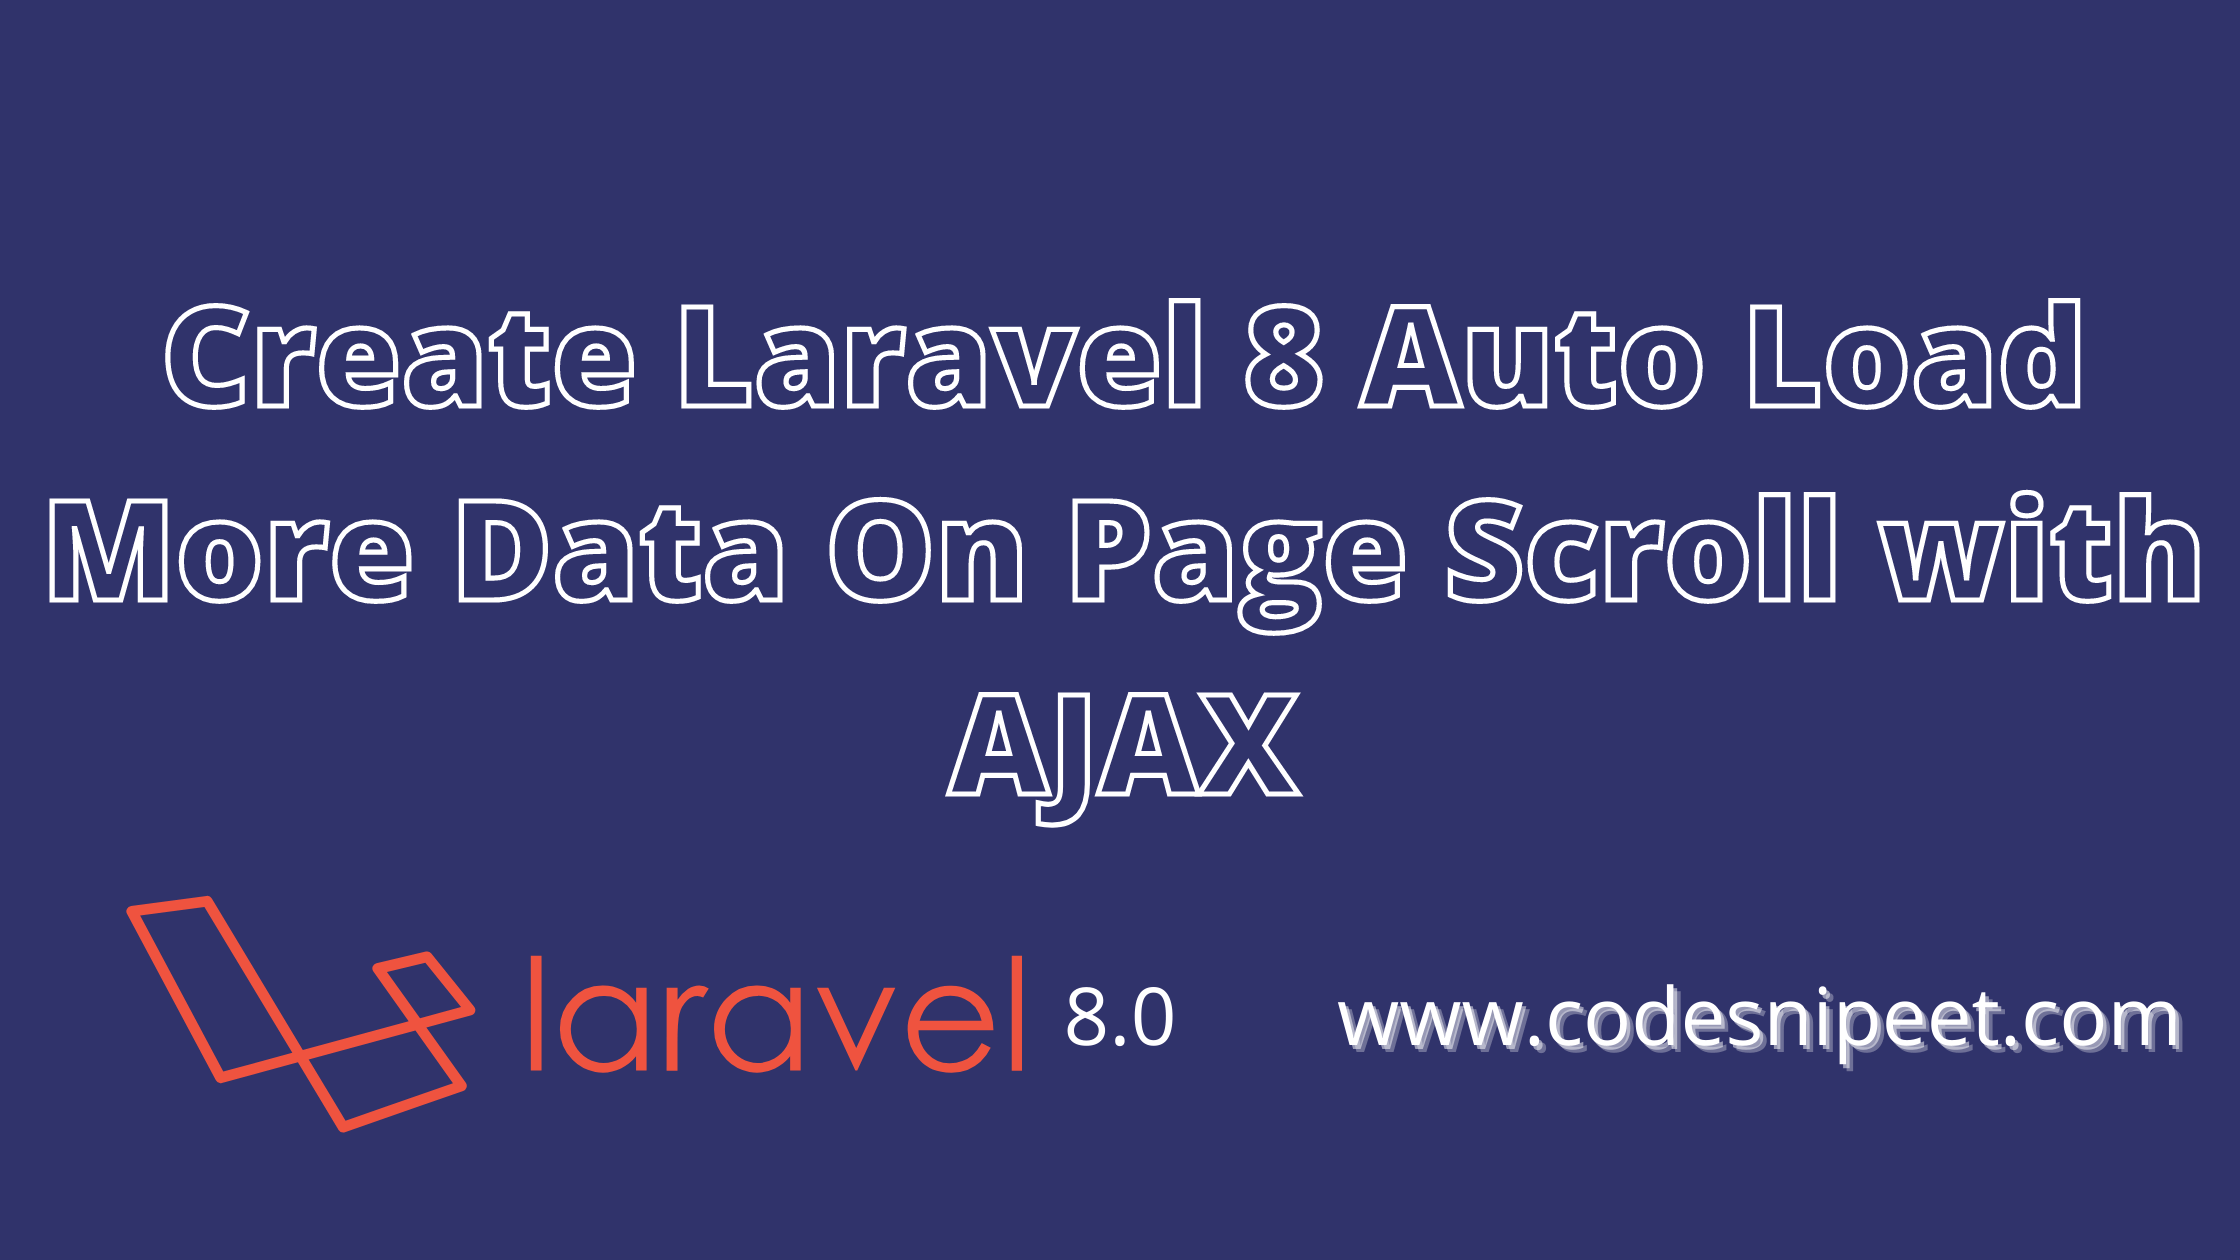 You are currently viewing Create Laravel 8 Auto Load More Data On Page Scroll with AJAX